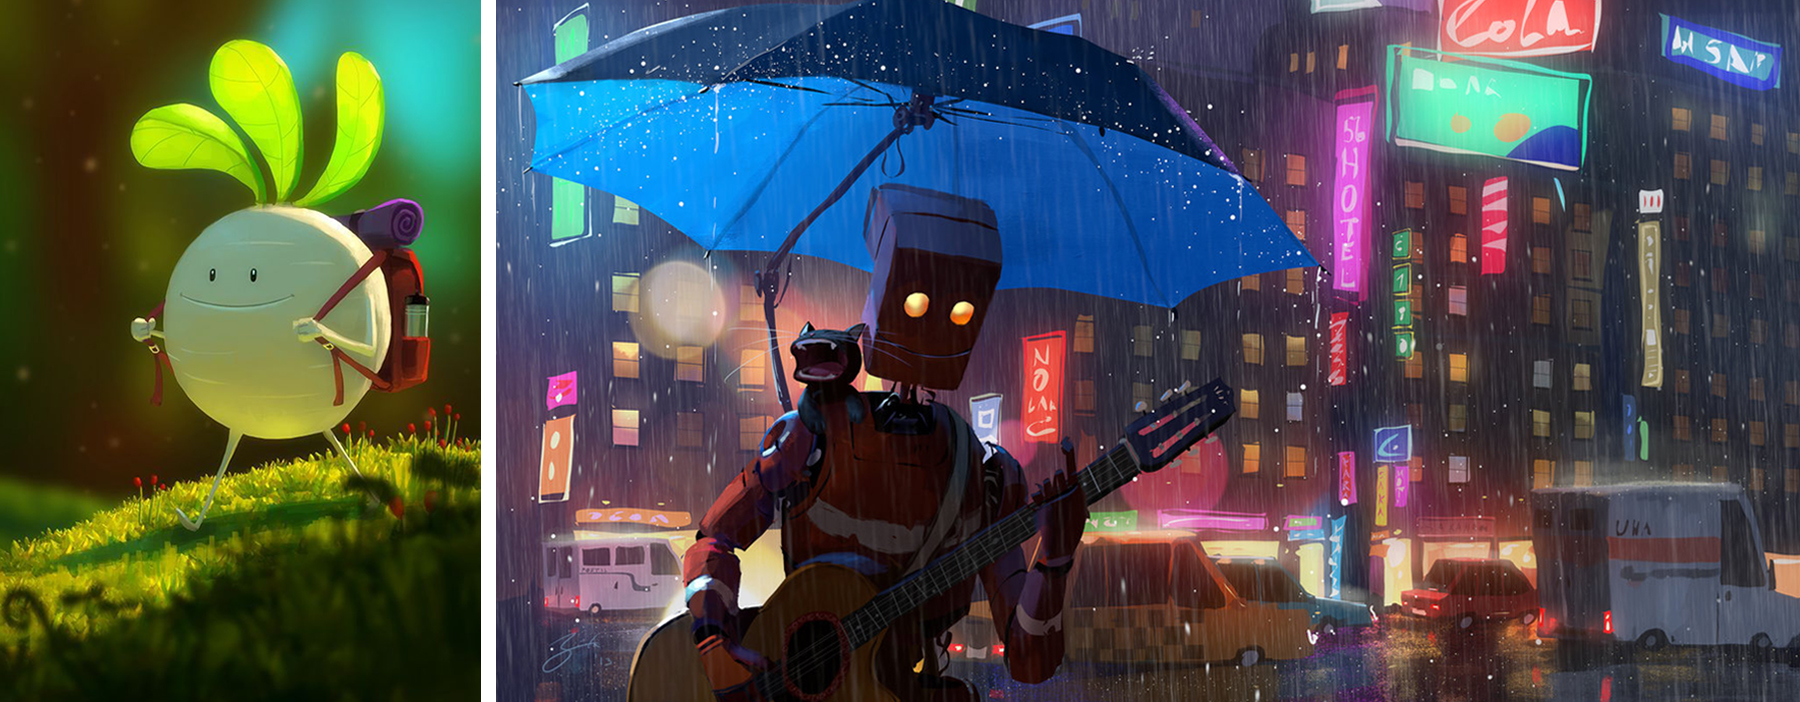 Two digital paintings of a radish character and a robot playing guitar in the rain by Goro Fujita.